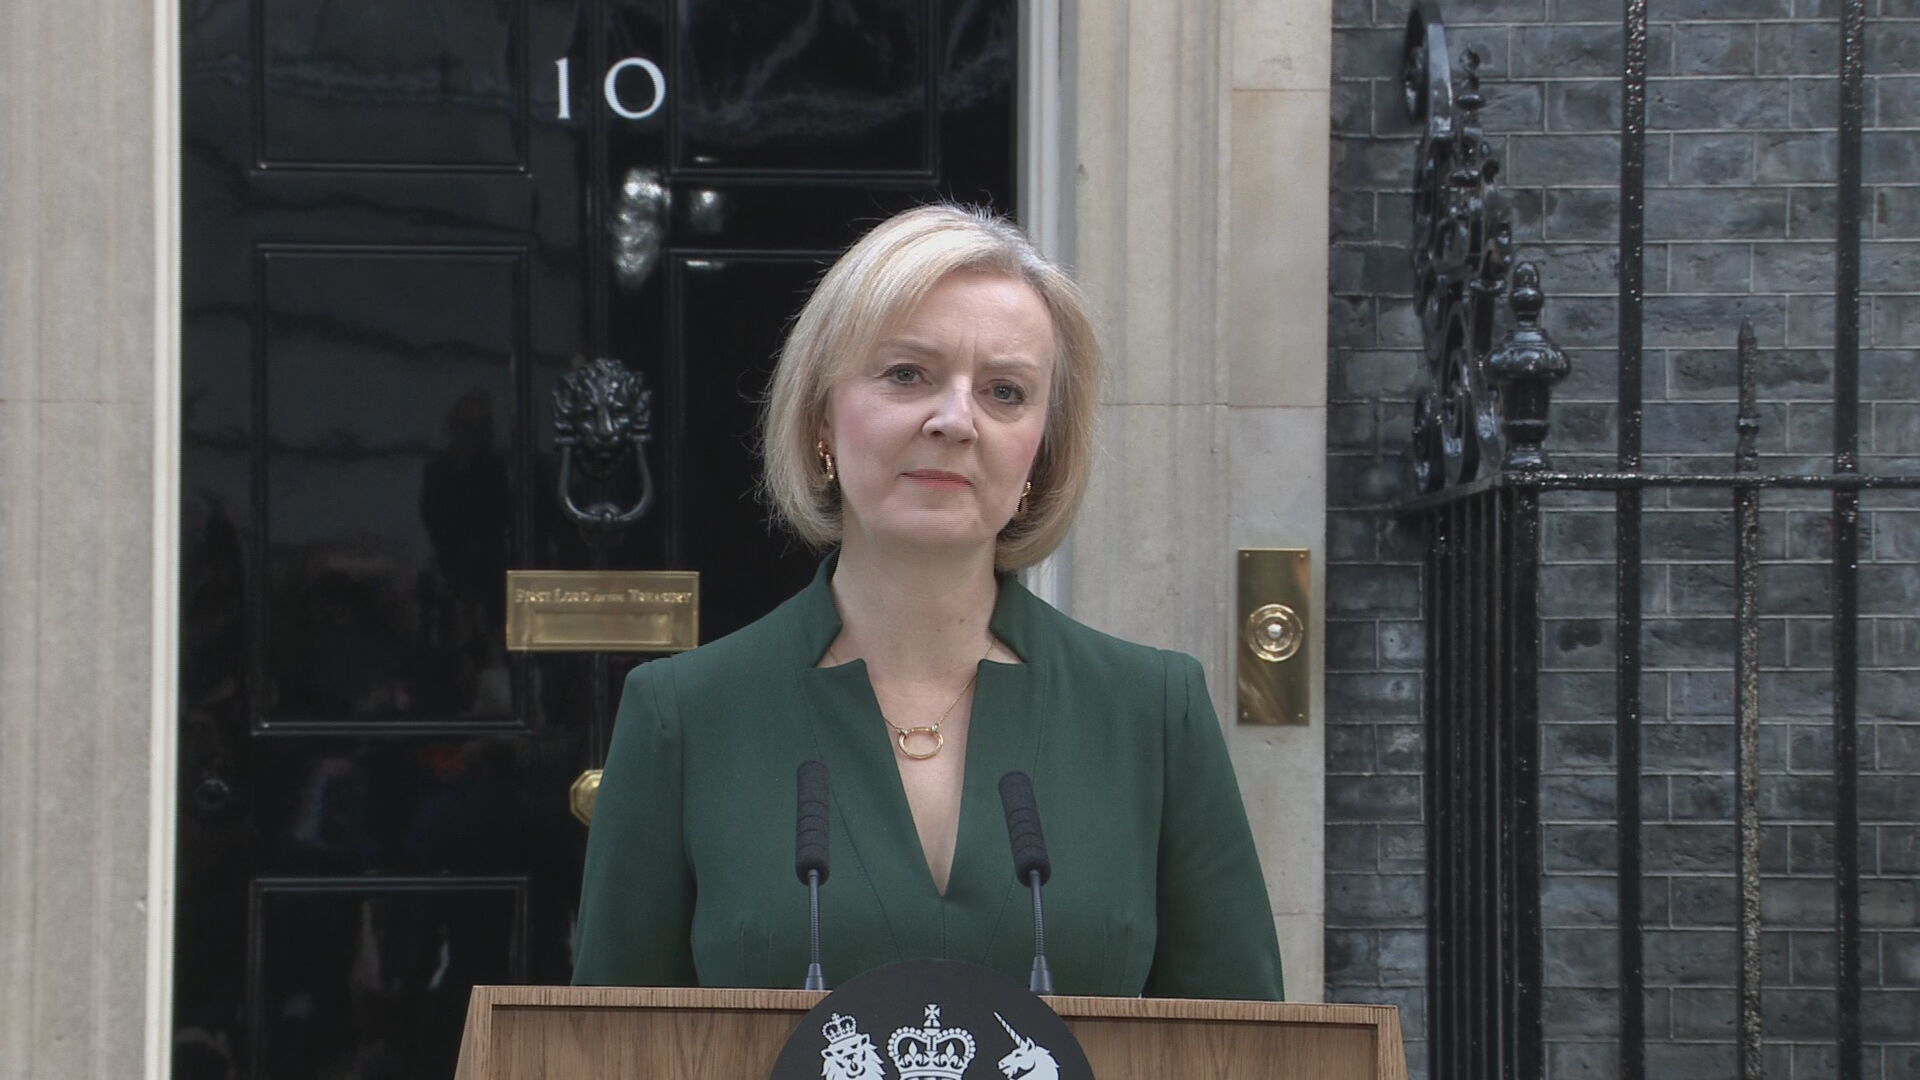 Liz Truss remains committed to the measures taken with last year's mini-budget which sparked market uncertainty and led to her resignation.